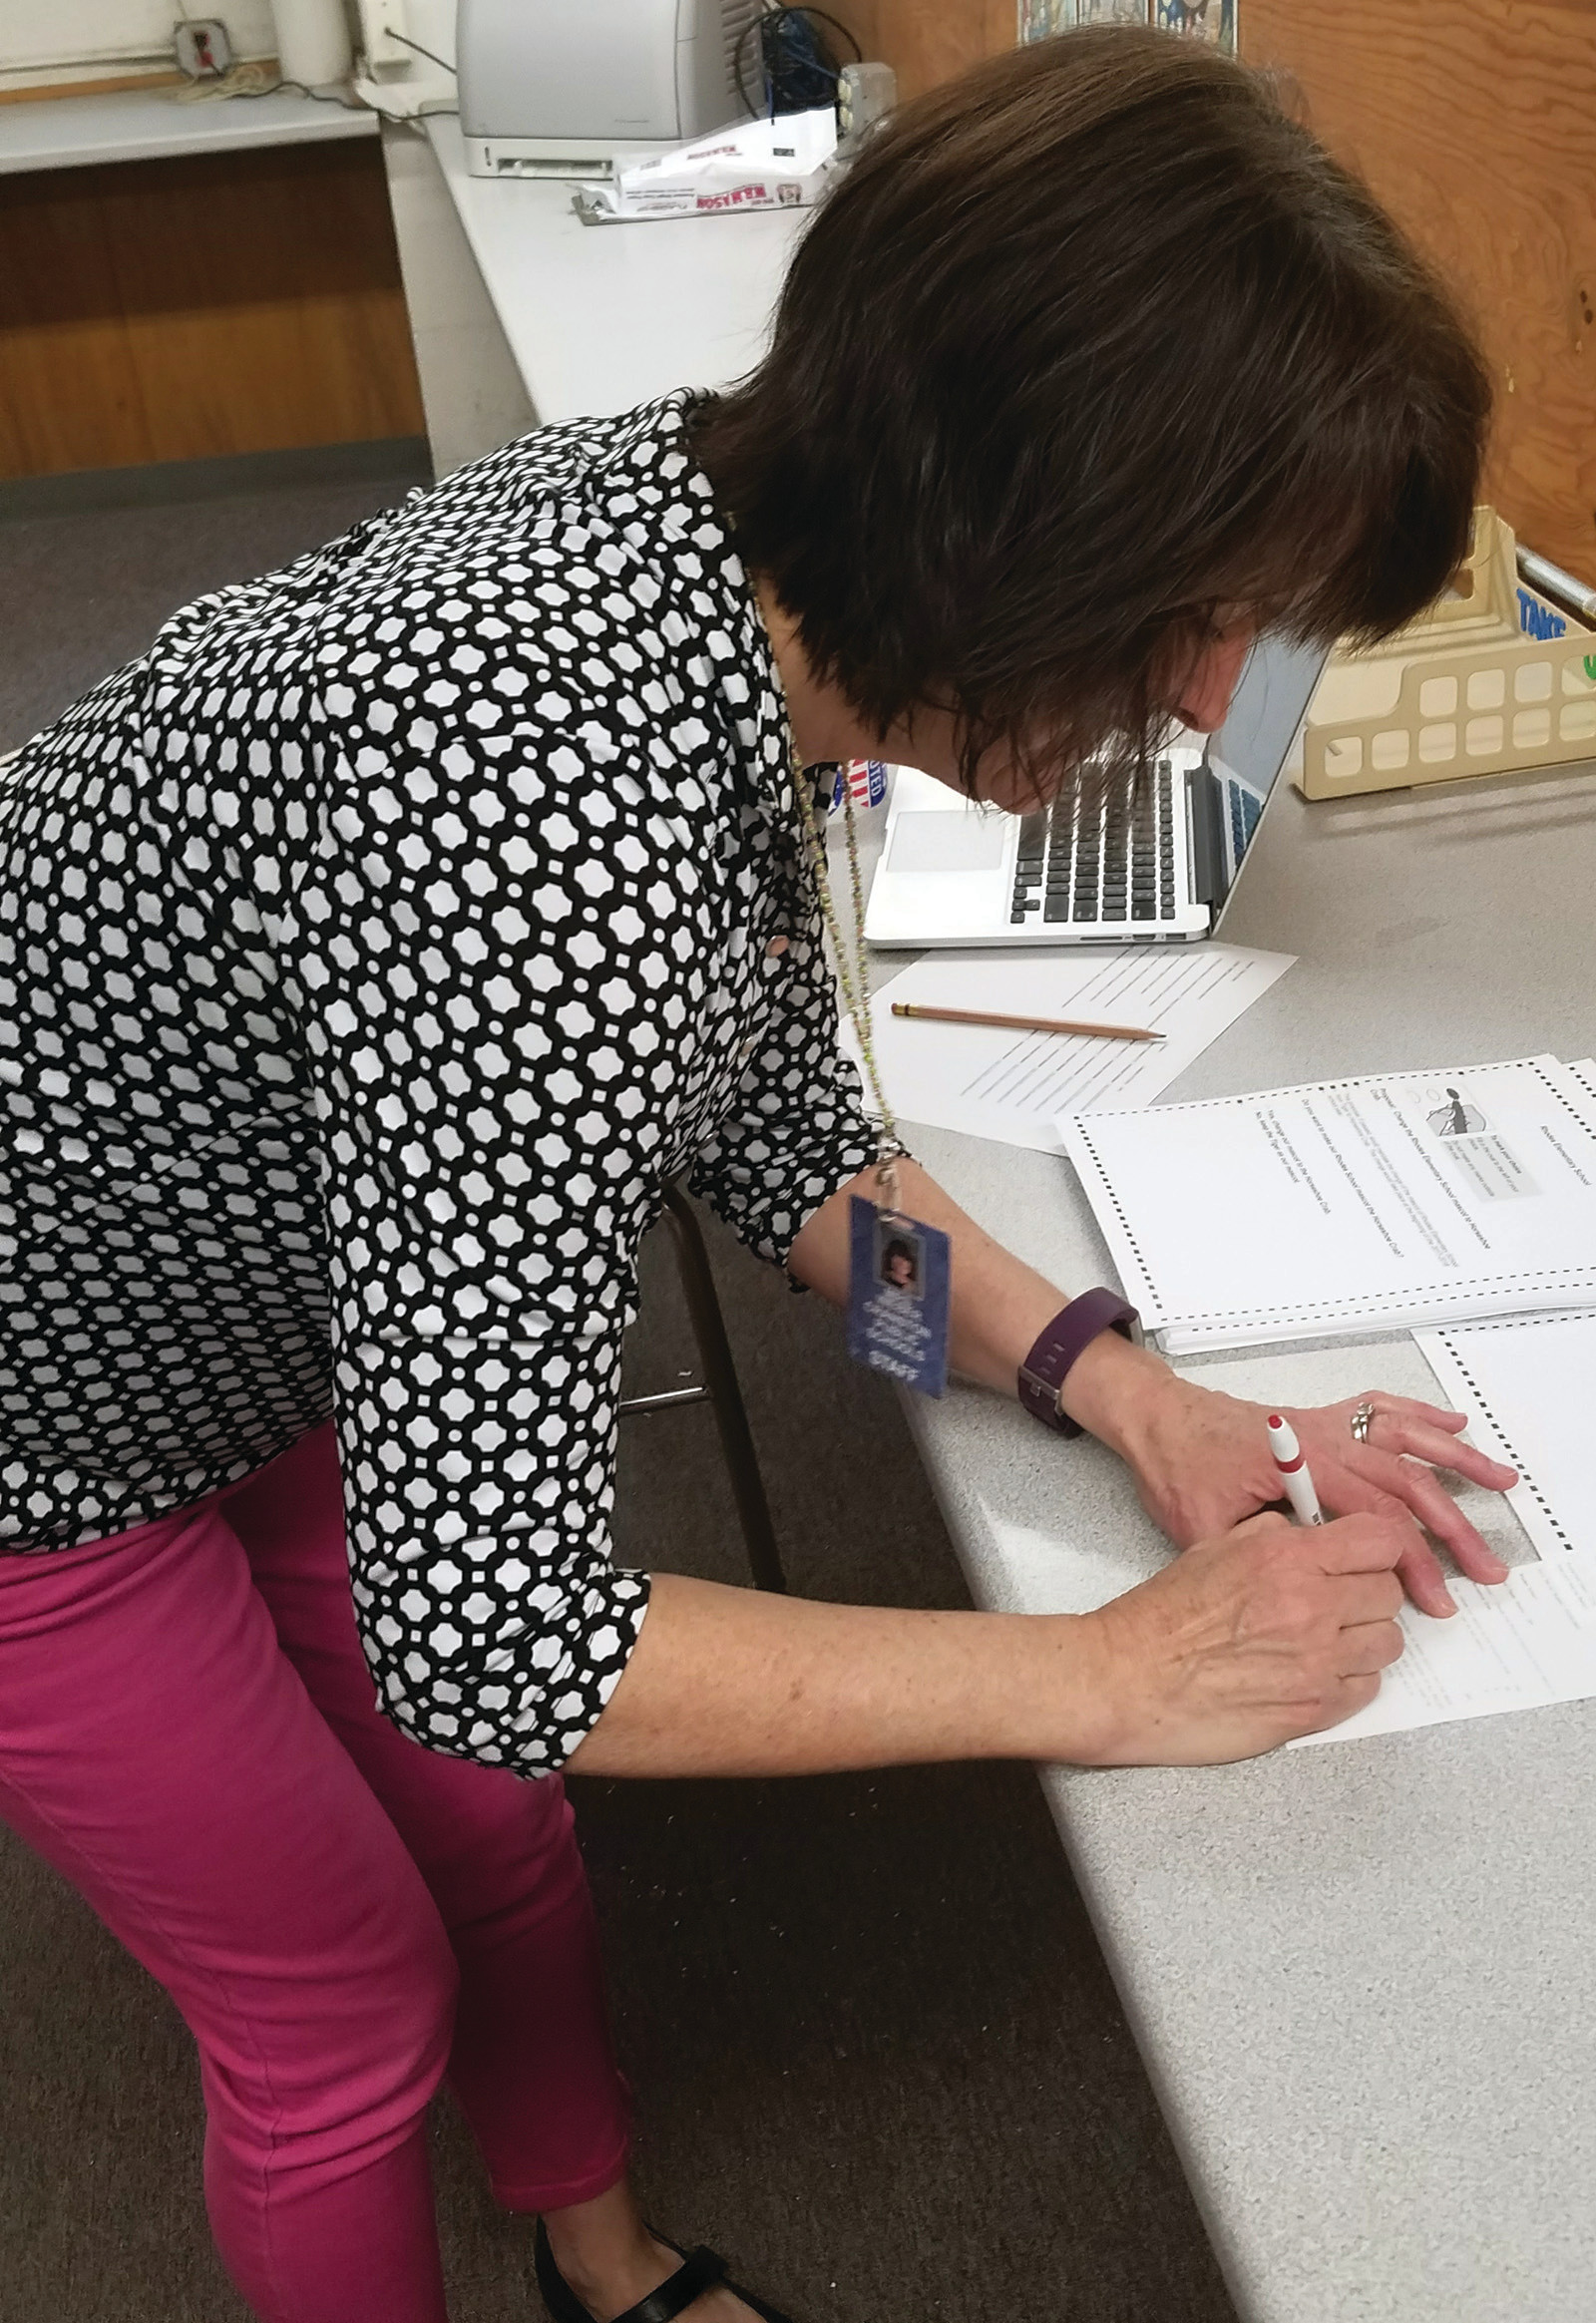 SIGNING OFF: Sue Weber signs off on the final results, just as in a real election.